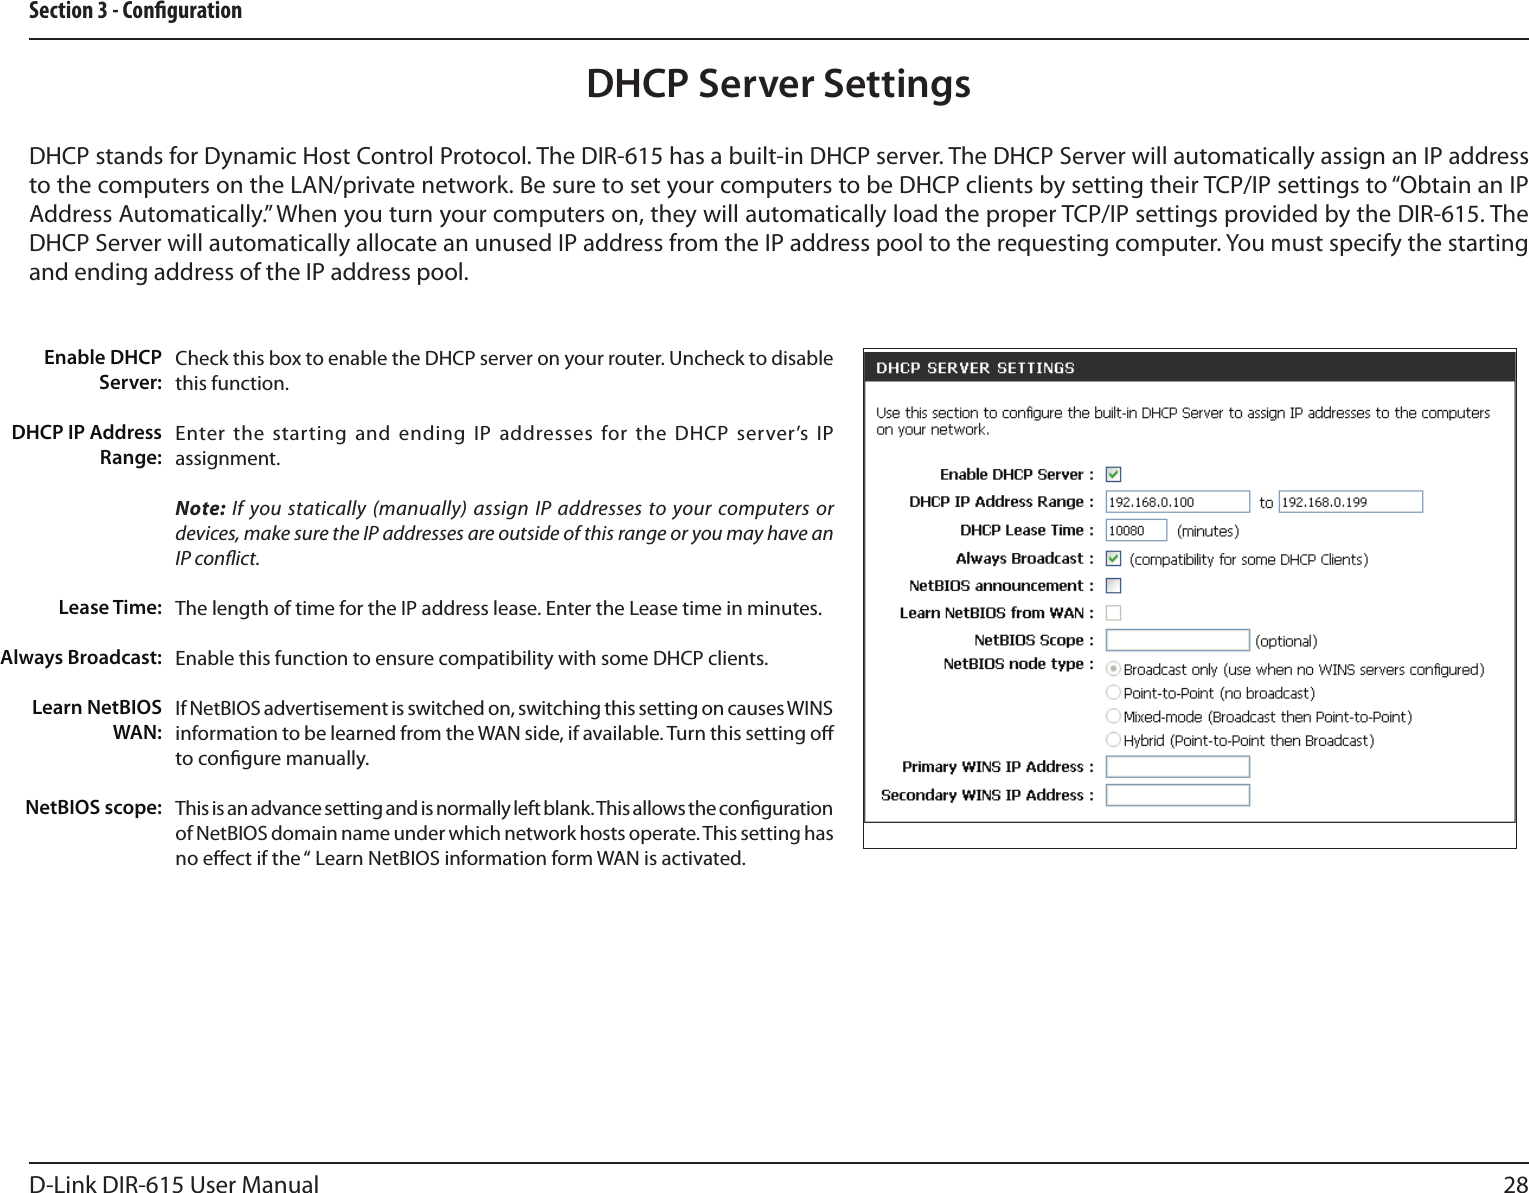 28D-Link DIR-615 User ManualSection 3 - CongurationCheck this box to enable the DHCP server on your router. Uncheck to disable this function.Enter the  starting and ending IP addresses for the DHCP server’s IP assignment.Note: If you statically (manually) assign IP addresses to your computers or devices, make sure the IP addresses are outside of this range or you may have an IP conict. The length of time for the IP address lease. Enter the Lease time in minutes.Enable this function to ensure compatibility with some DHCP clients.If NetBIOS advertisement is switched on, switching this setting on causes WINS information to be learned from the WAN side, if available. Turn this setting o to congure manually. This is an advance setting and is normally left blank. This allows the conguration of NetBIOS domain name under which network hosts operate. This setting has no eect if the “ Learn NetBIOS information form WAN is activated.  Enable DHCP Server:DHCP IP Address Range:Lease Time:Always Broadcast:Learn NetBIOS WAN:NetBIOS scope: DHCP Server SettingsDHCP stands for Dynamic Host Control Protocol. The DIR-615 has a built-in DHCP server. The DHCP Server will automatically assign an IP address to the computers on the LAN/private network. Be sure to set your computers to be DHCP clients by setting their TCP/IP settings to “Obtain an IP Address Automatically.” When you turn your computers on, they will automatically load the proper TCP/IP settings provided by the DIR-615. The DHCP Server will automatically allocate an unused IP address from the IP address pool to the requesting computer. You must specify the starting and ending address of the IP address pool.